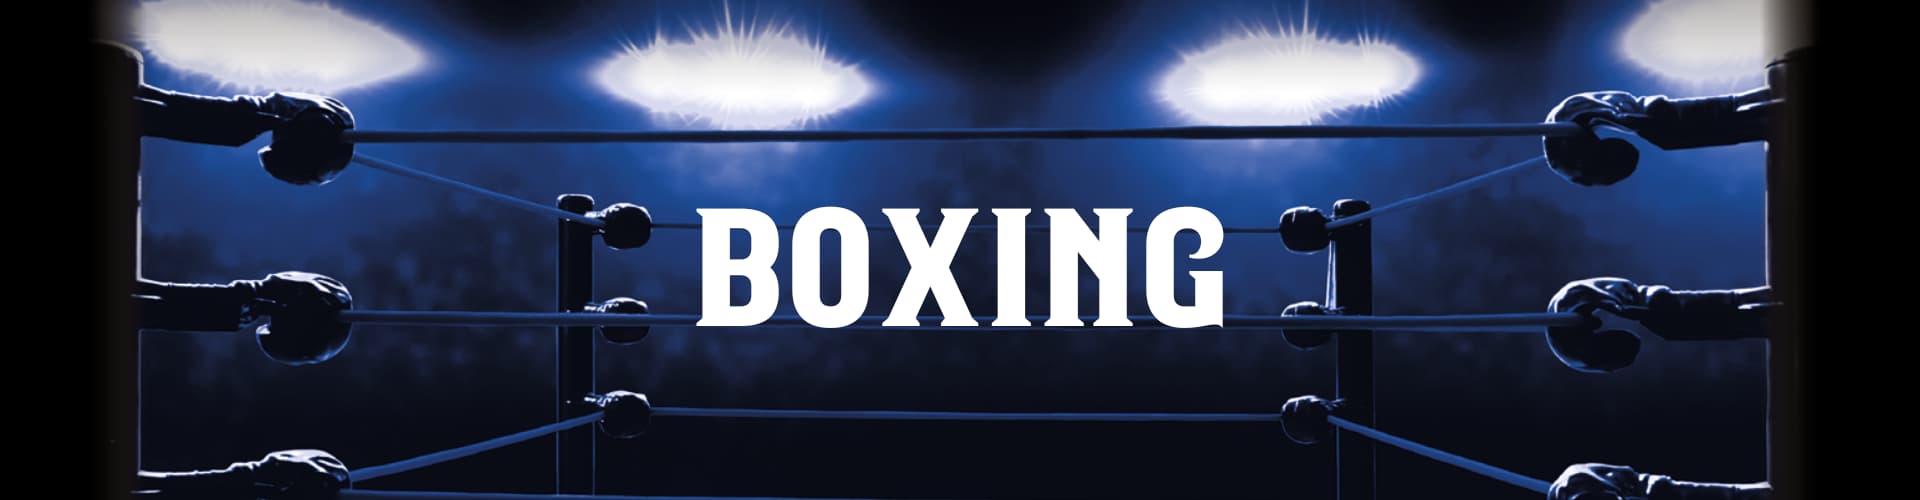 Watch Live Boxing in Purley at The Pear Tree Pub